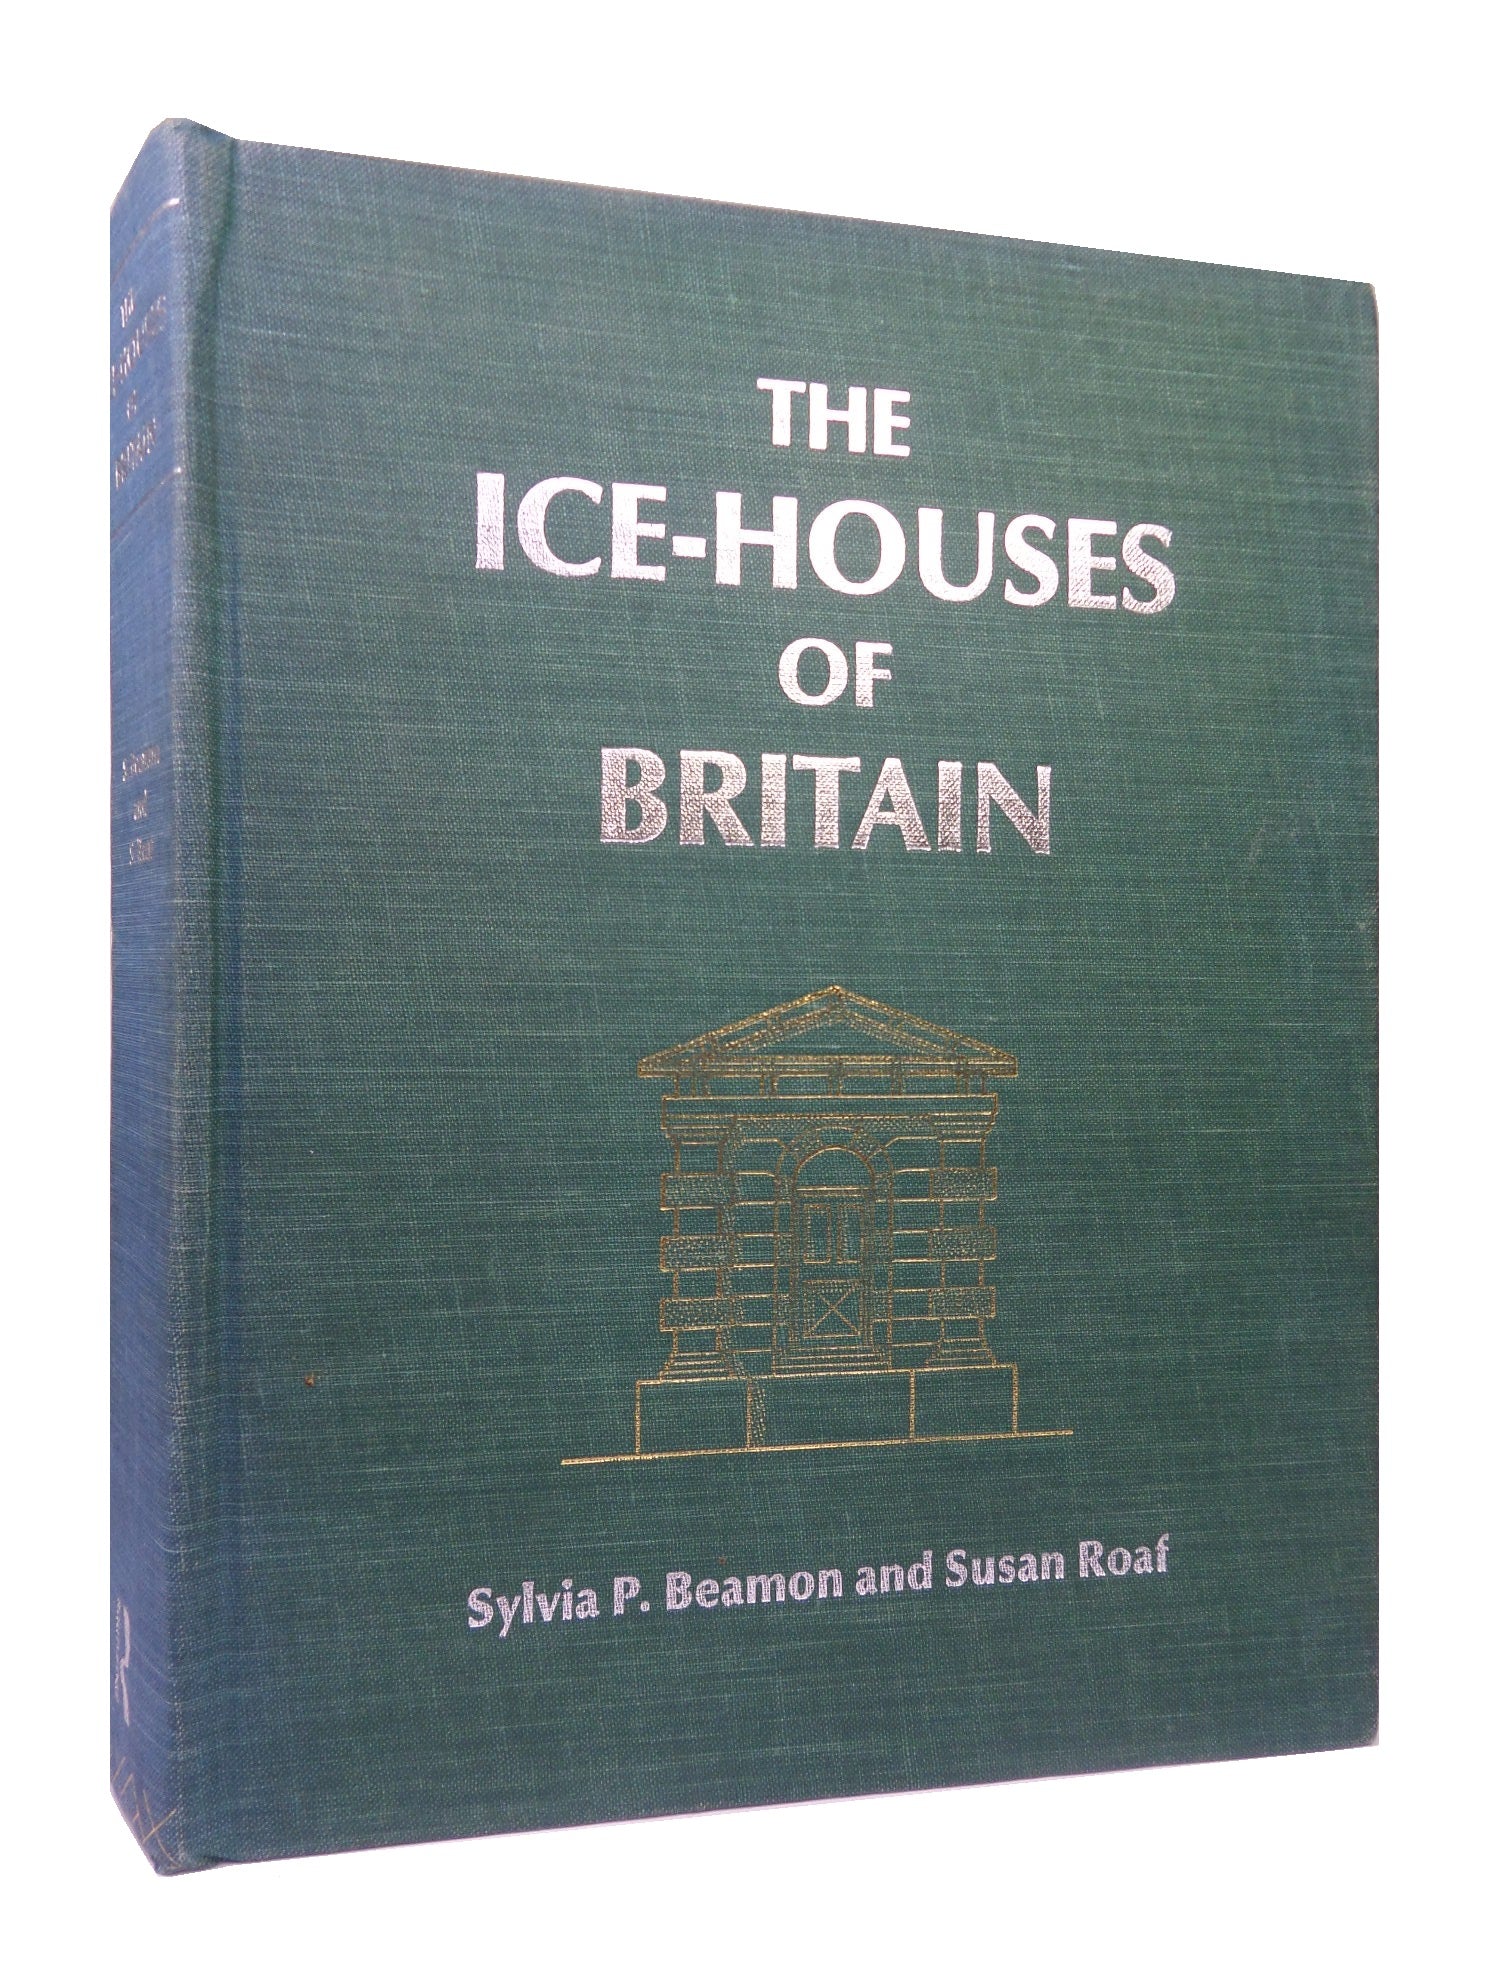 THE ICE-HOUSES OF BRITAIN BY SYLVIA BEAMON AND SUSAN ROAF 1990 HARDCOVER